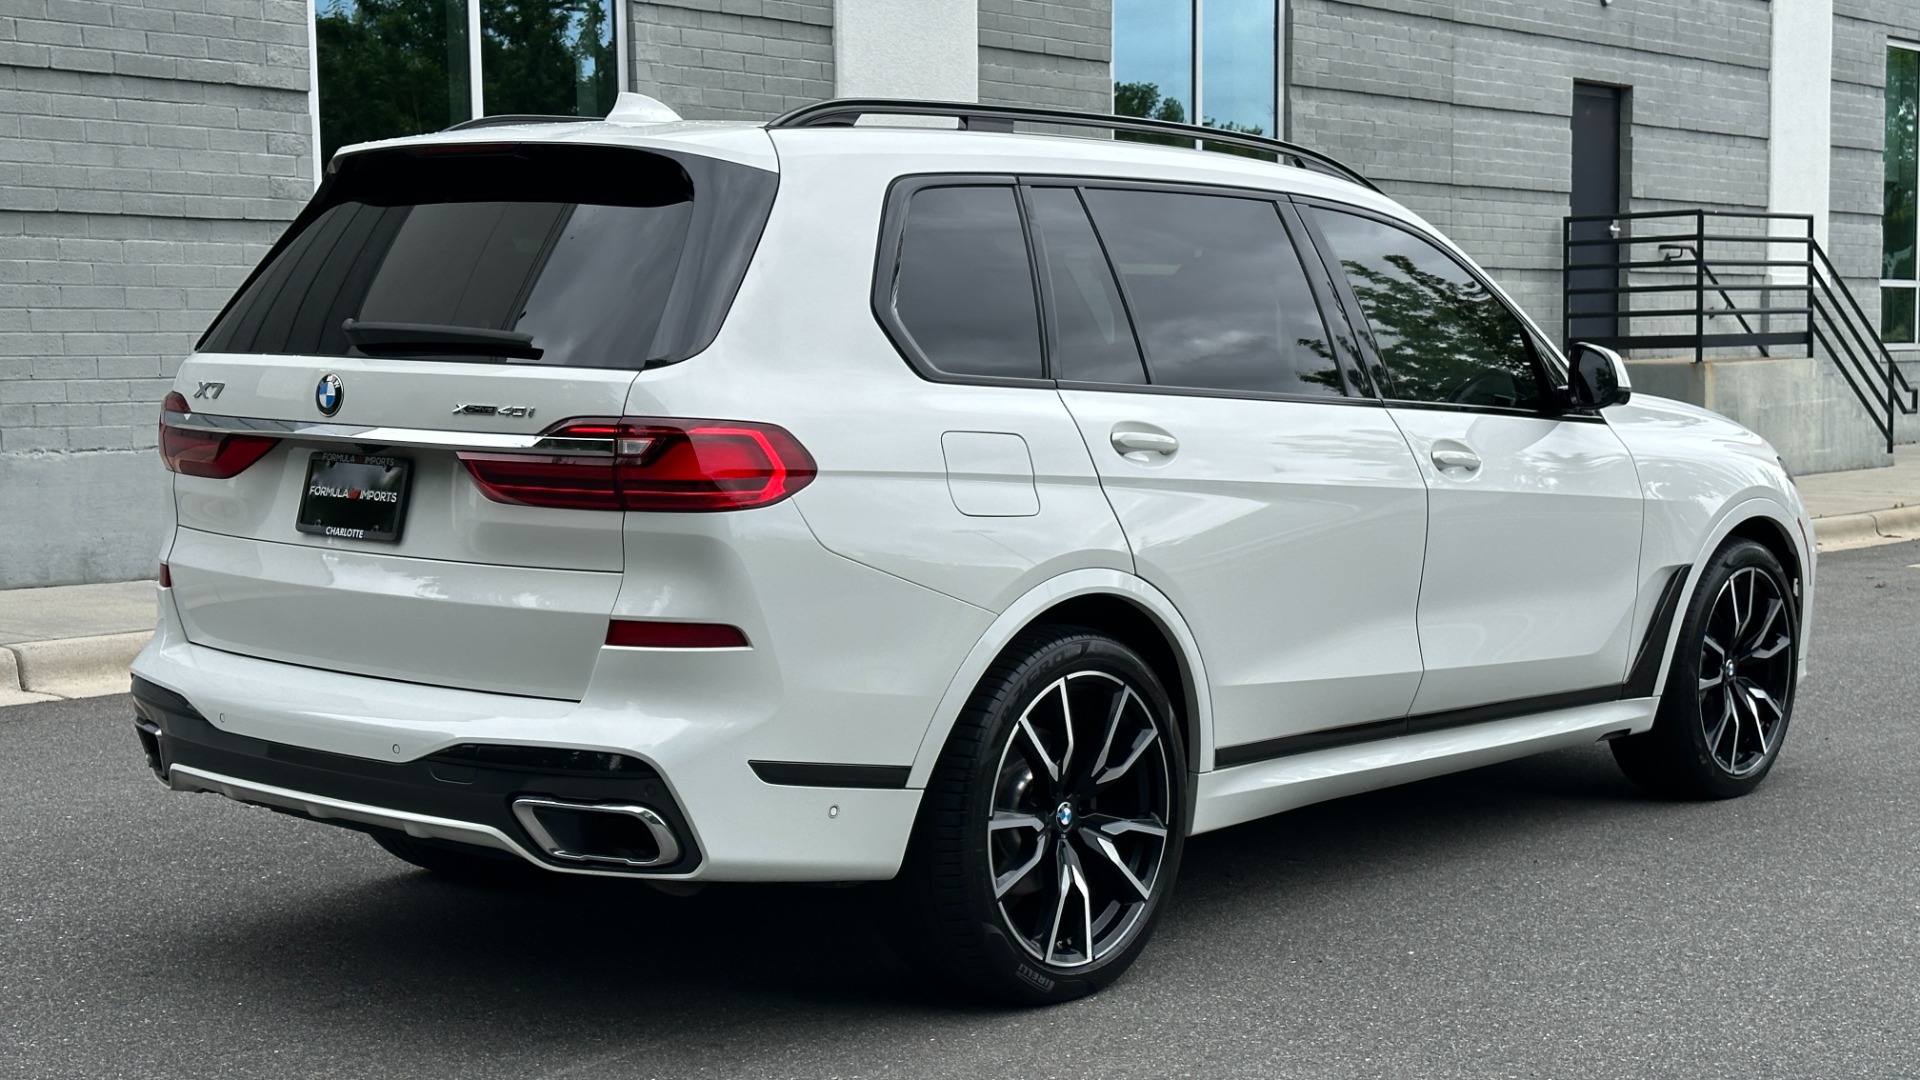 Used 2020 BMW X7 xDrive40i / 22IN WHEELS / CAPTAIN CHAIRS / M SPORT / PREMIUM PKG for sale $59,995 at Formula Imports in Charlotte NC 28227 4